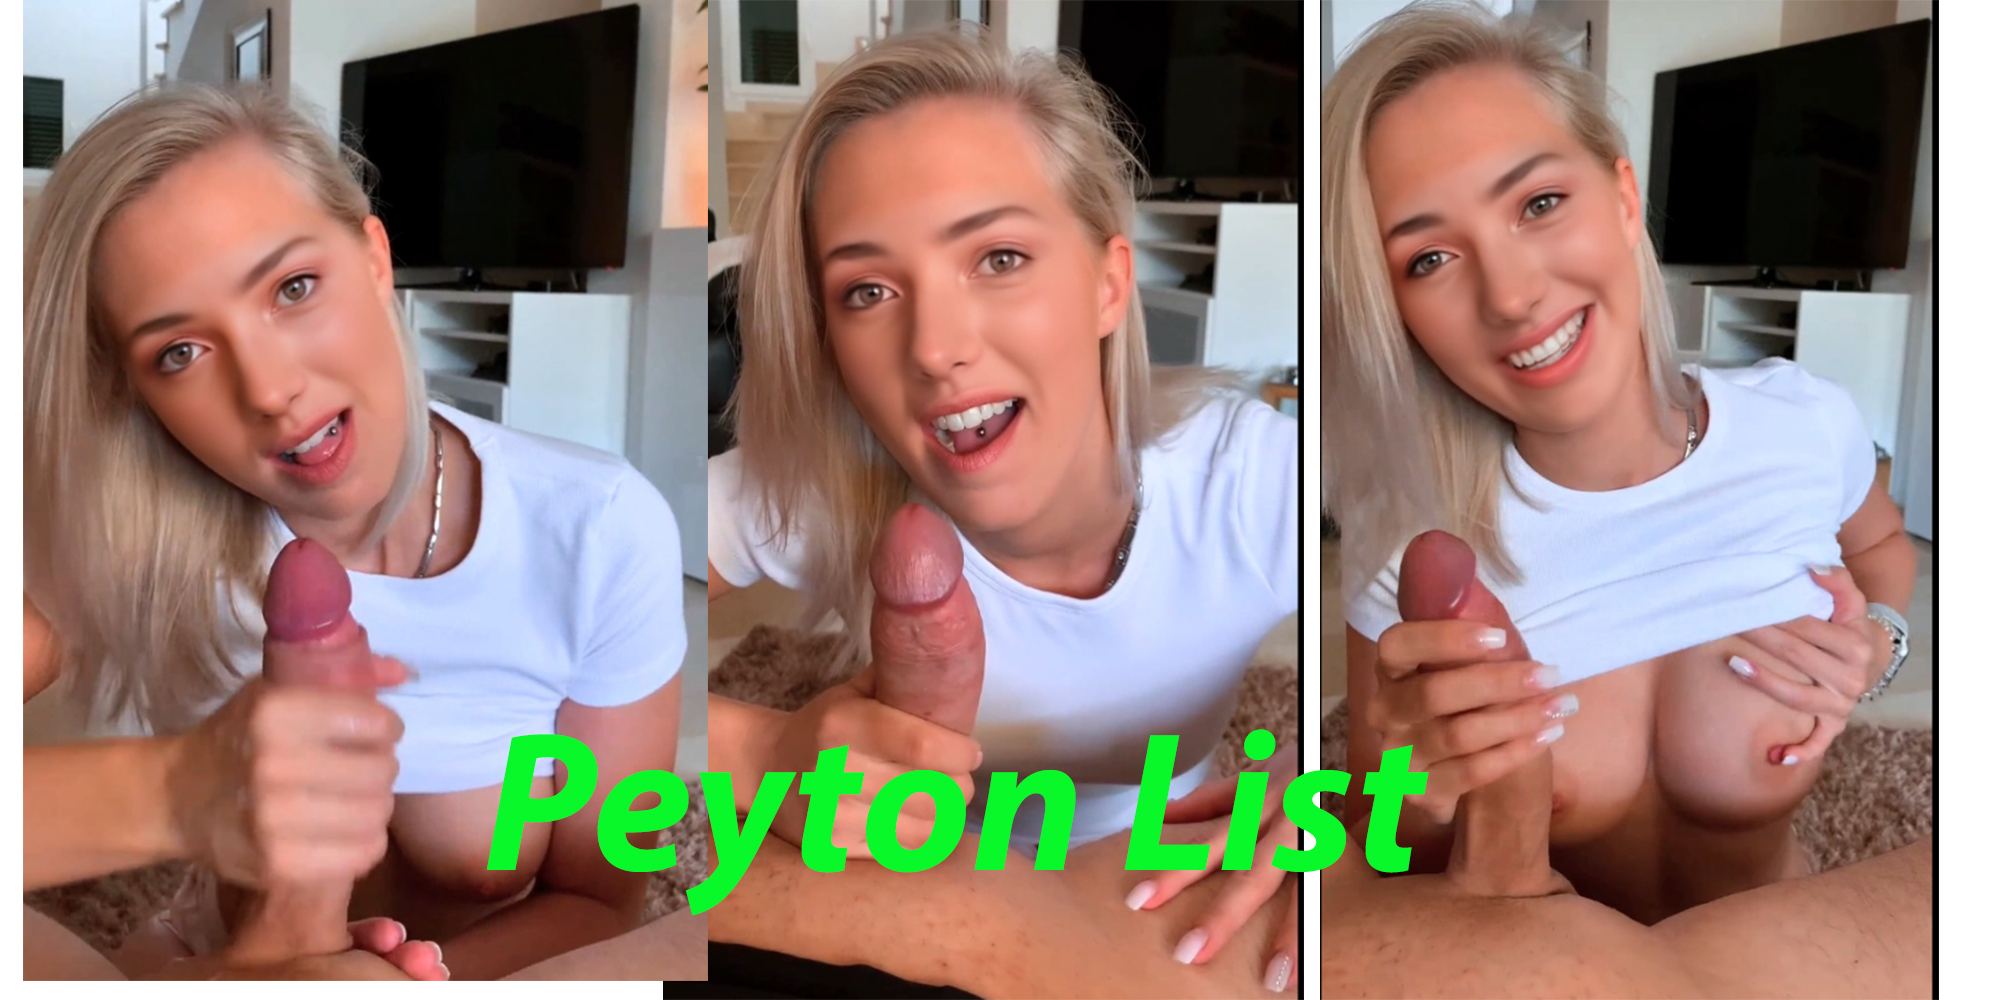 Peyton List takes care of your cock (full version)